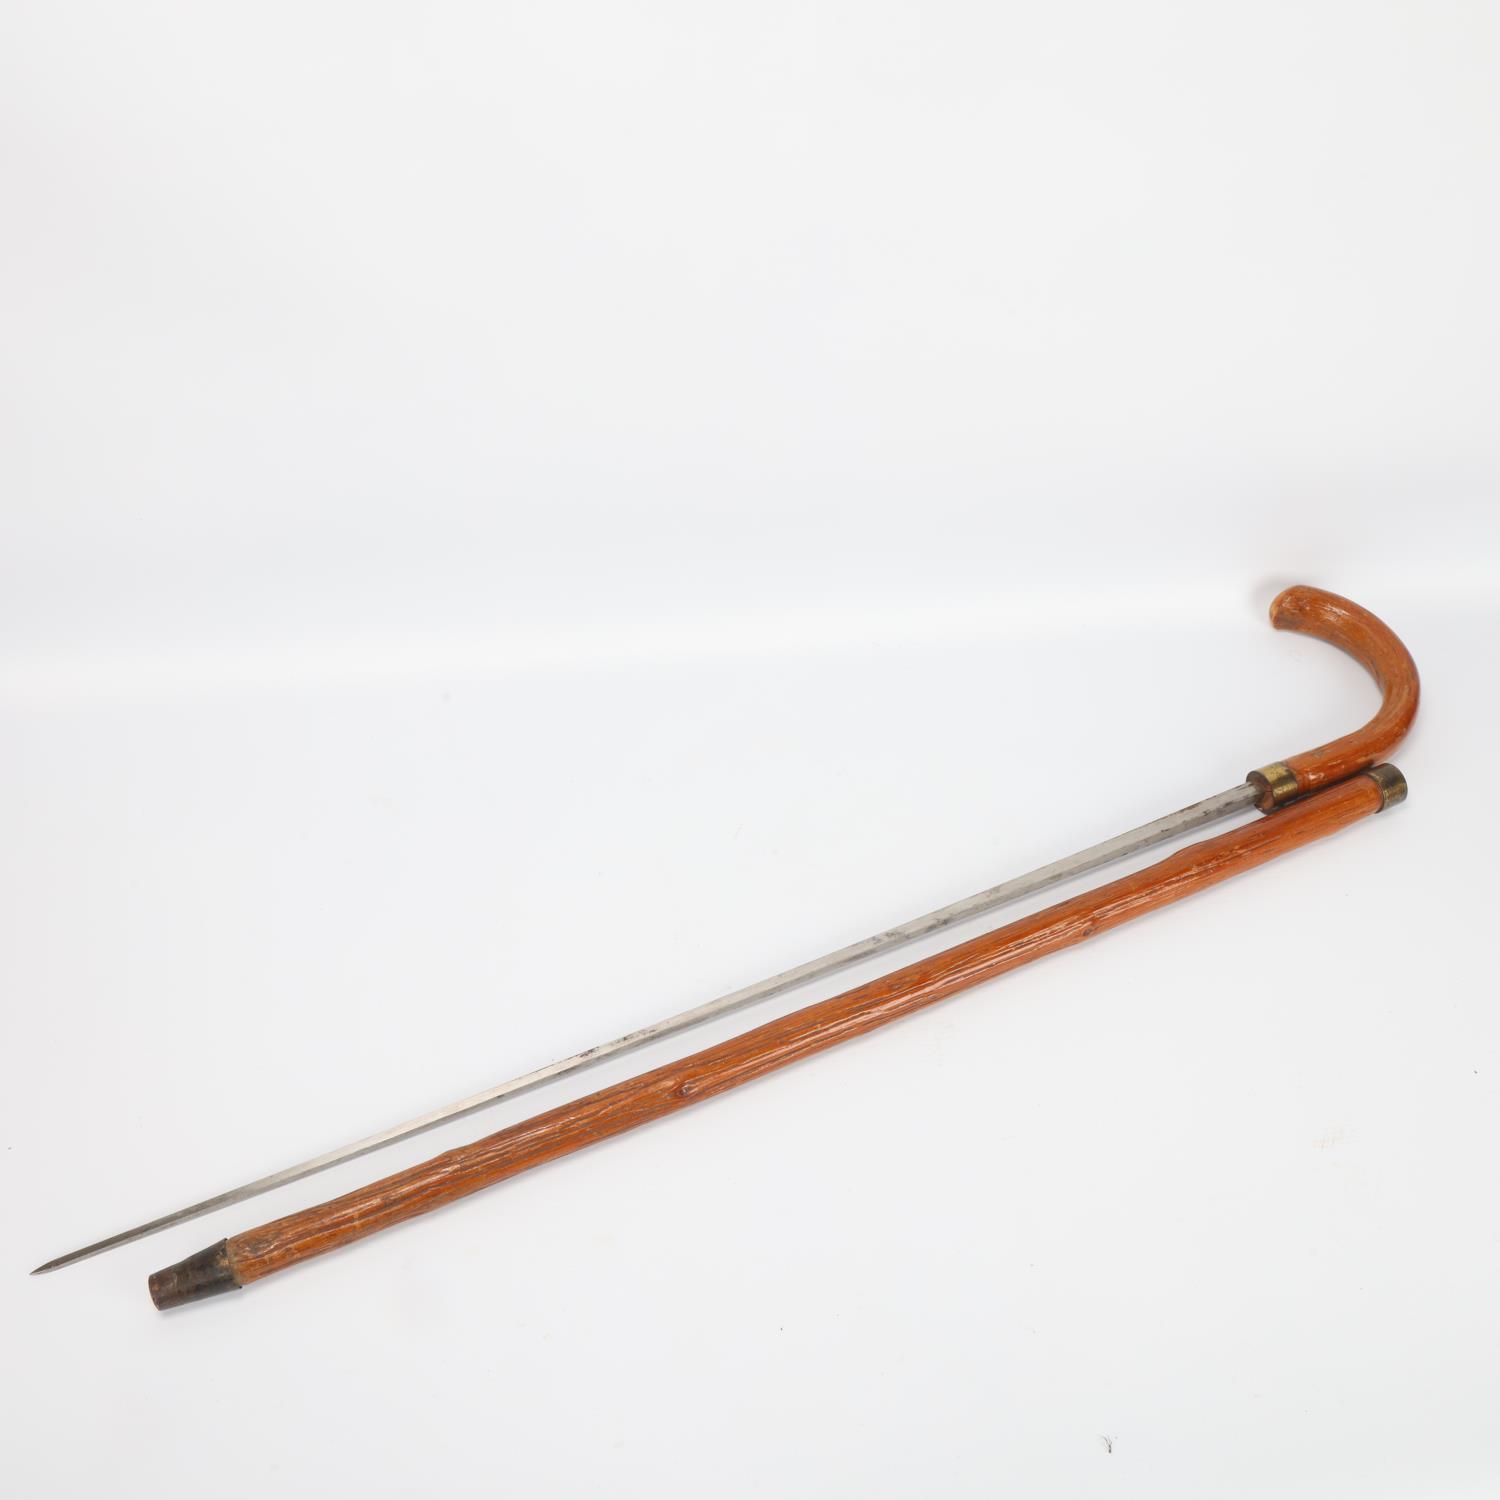 19th century bamboo sword stick with curved handle, square section blade stamped Mole Birmingham, - Image 3 of 3